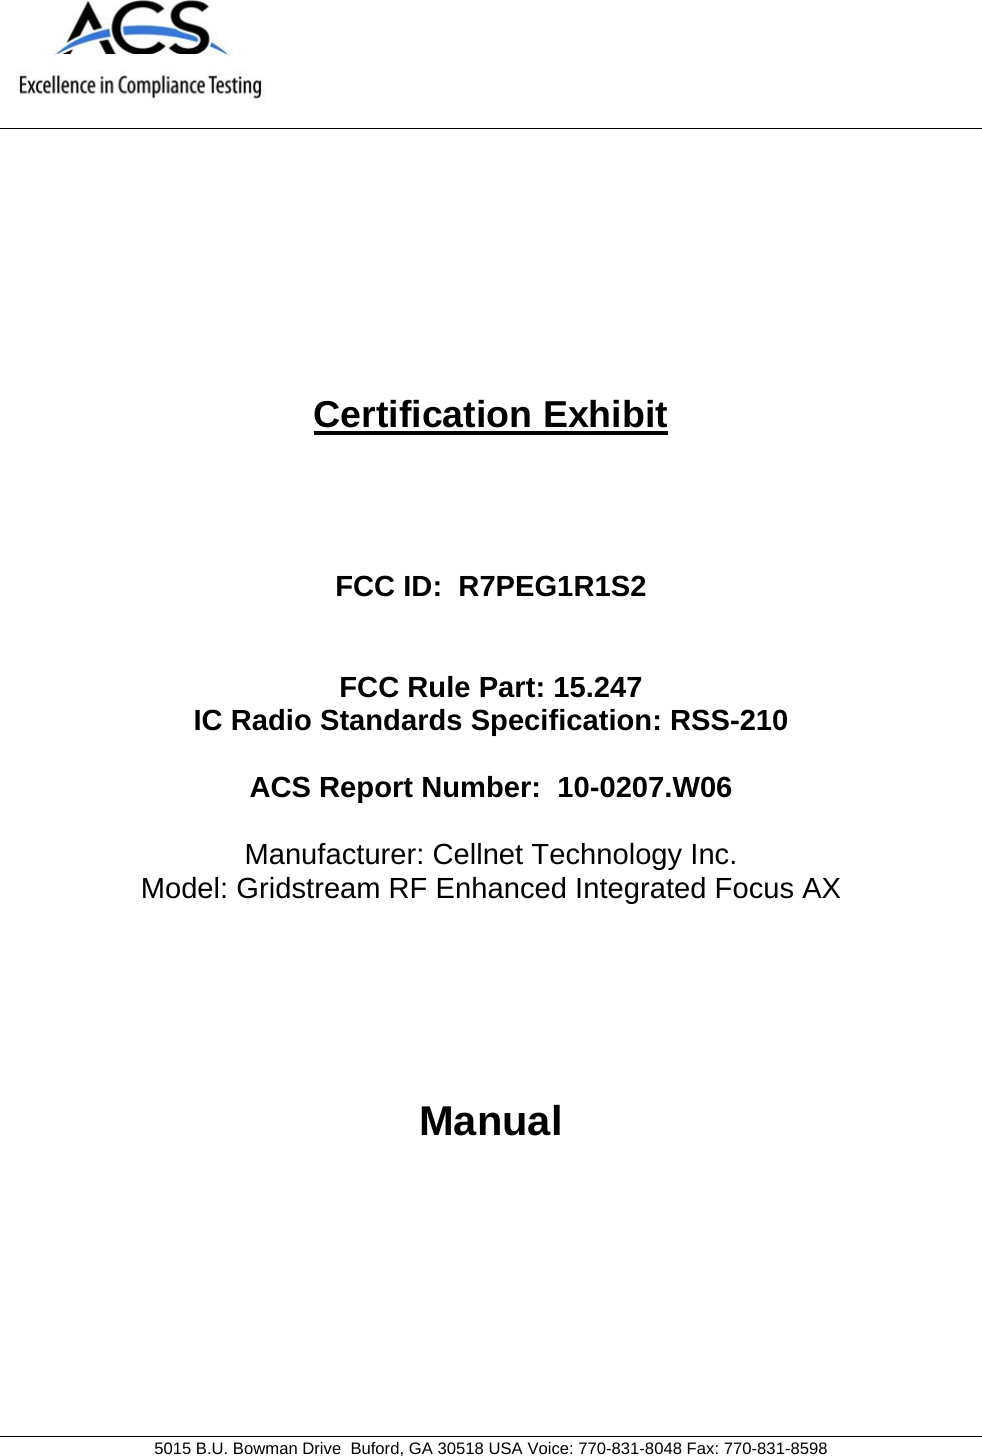     5015 B.U. Bowman Drive  Buford, GA 30518 USA Voice: 770-831-8048 Fax: 770-831-8598   Certification Exhibit     FCC ID:  R7PEG1R1S2   FCC Rule Part: 15.247 IC Radio Standards Specification: RSS-210  ACS Report Number:  10-0207.W06   Manufacturer: Cellnet Technology Inc. Model: Gridstream RF Enhanced Integrated Focus AX     Manual  